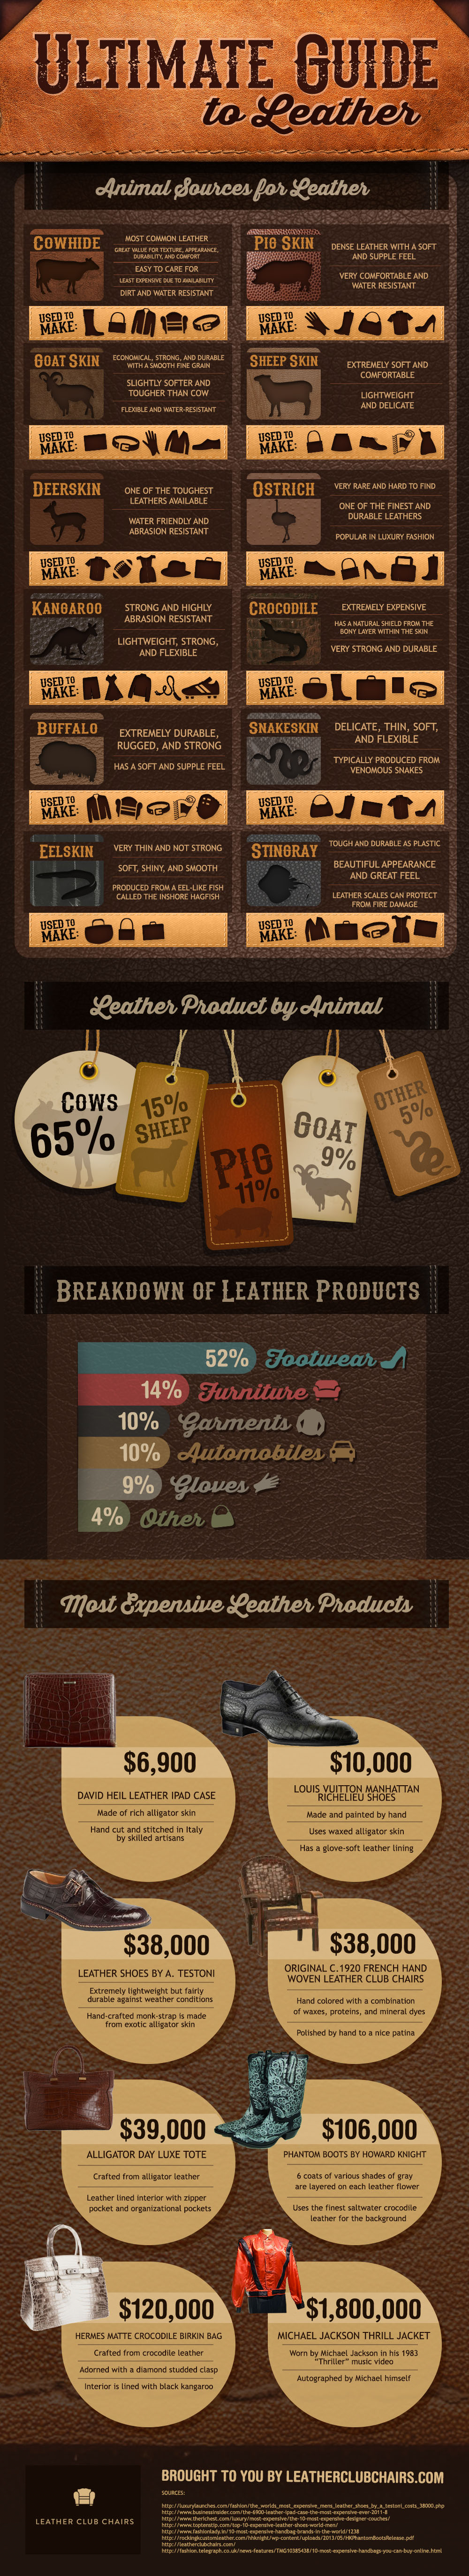 Ultimate Guide to Leather